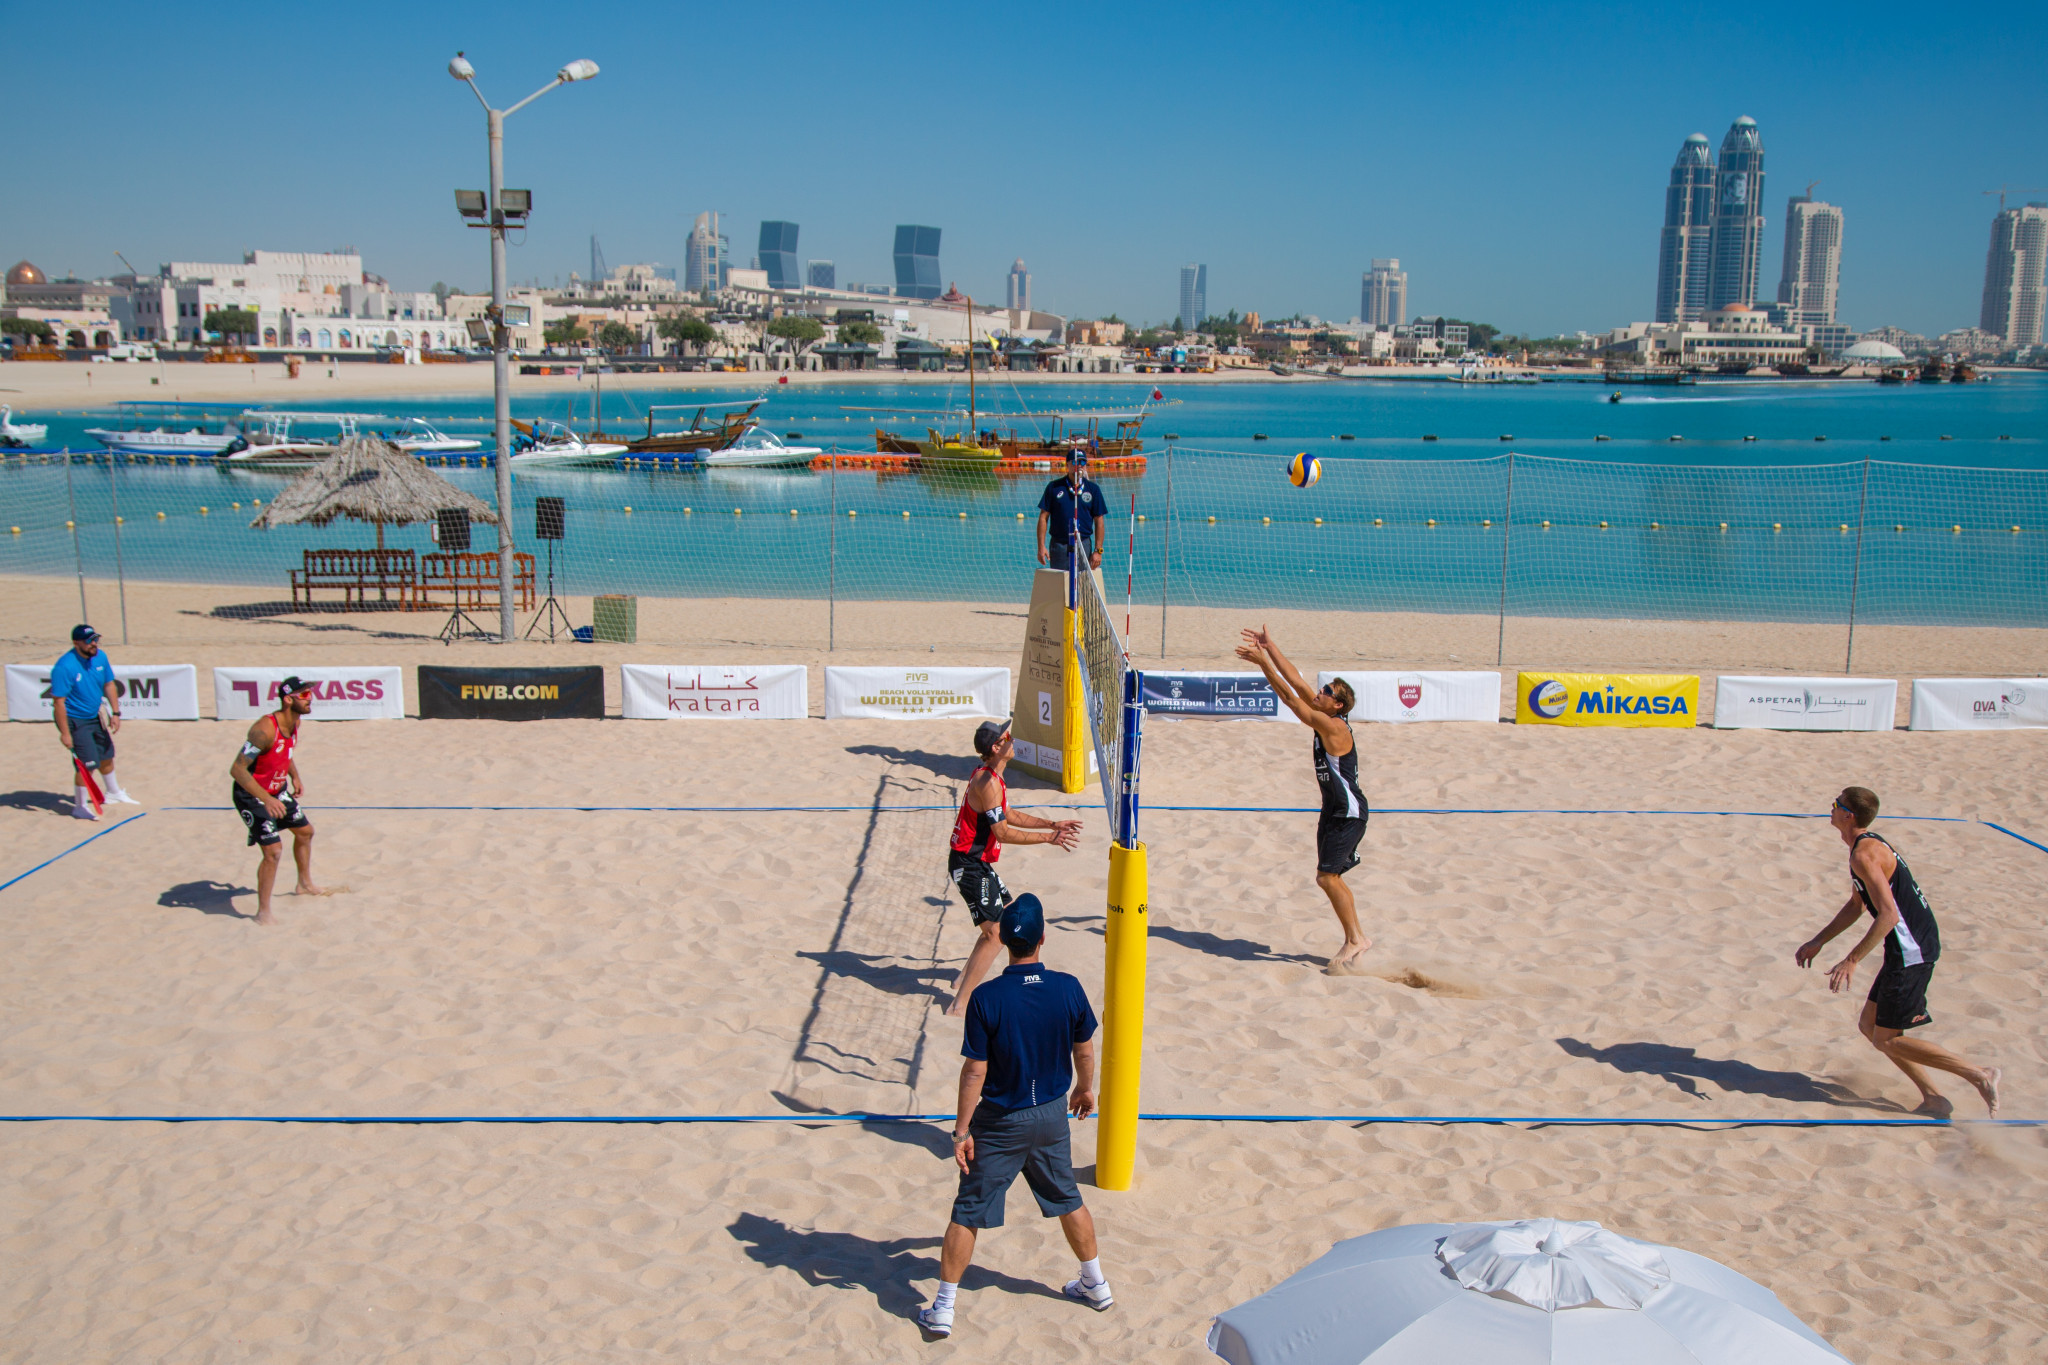 The four-star FIVB Beach Volleyball World Tour event is underway in Doha ©FIVB